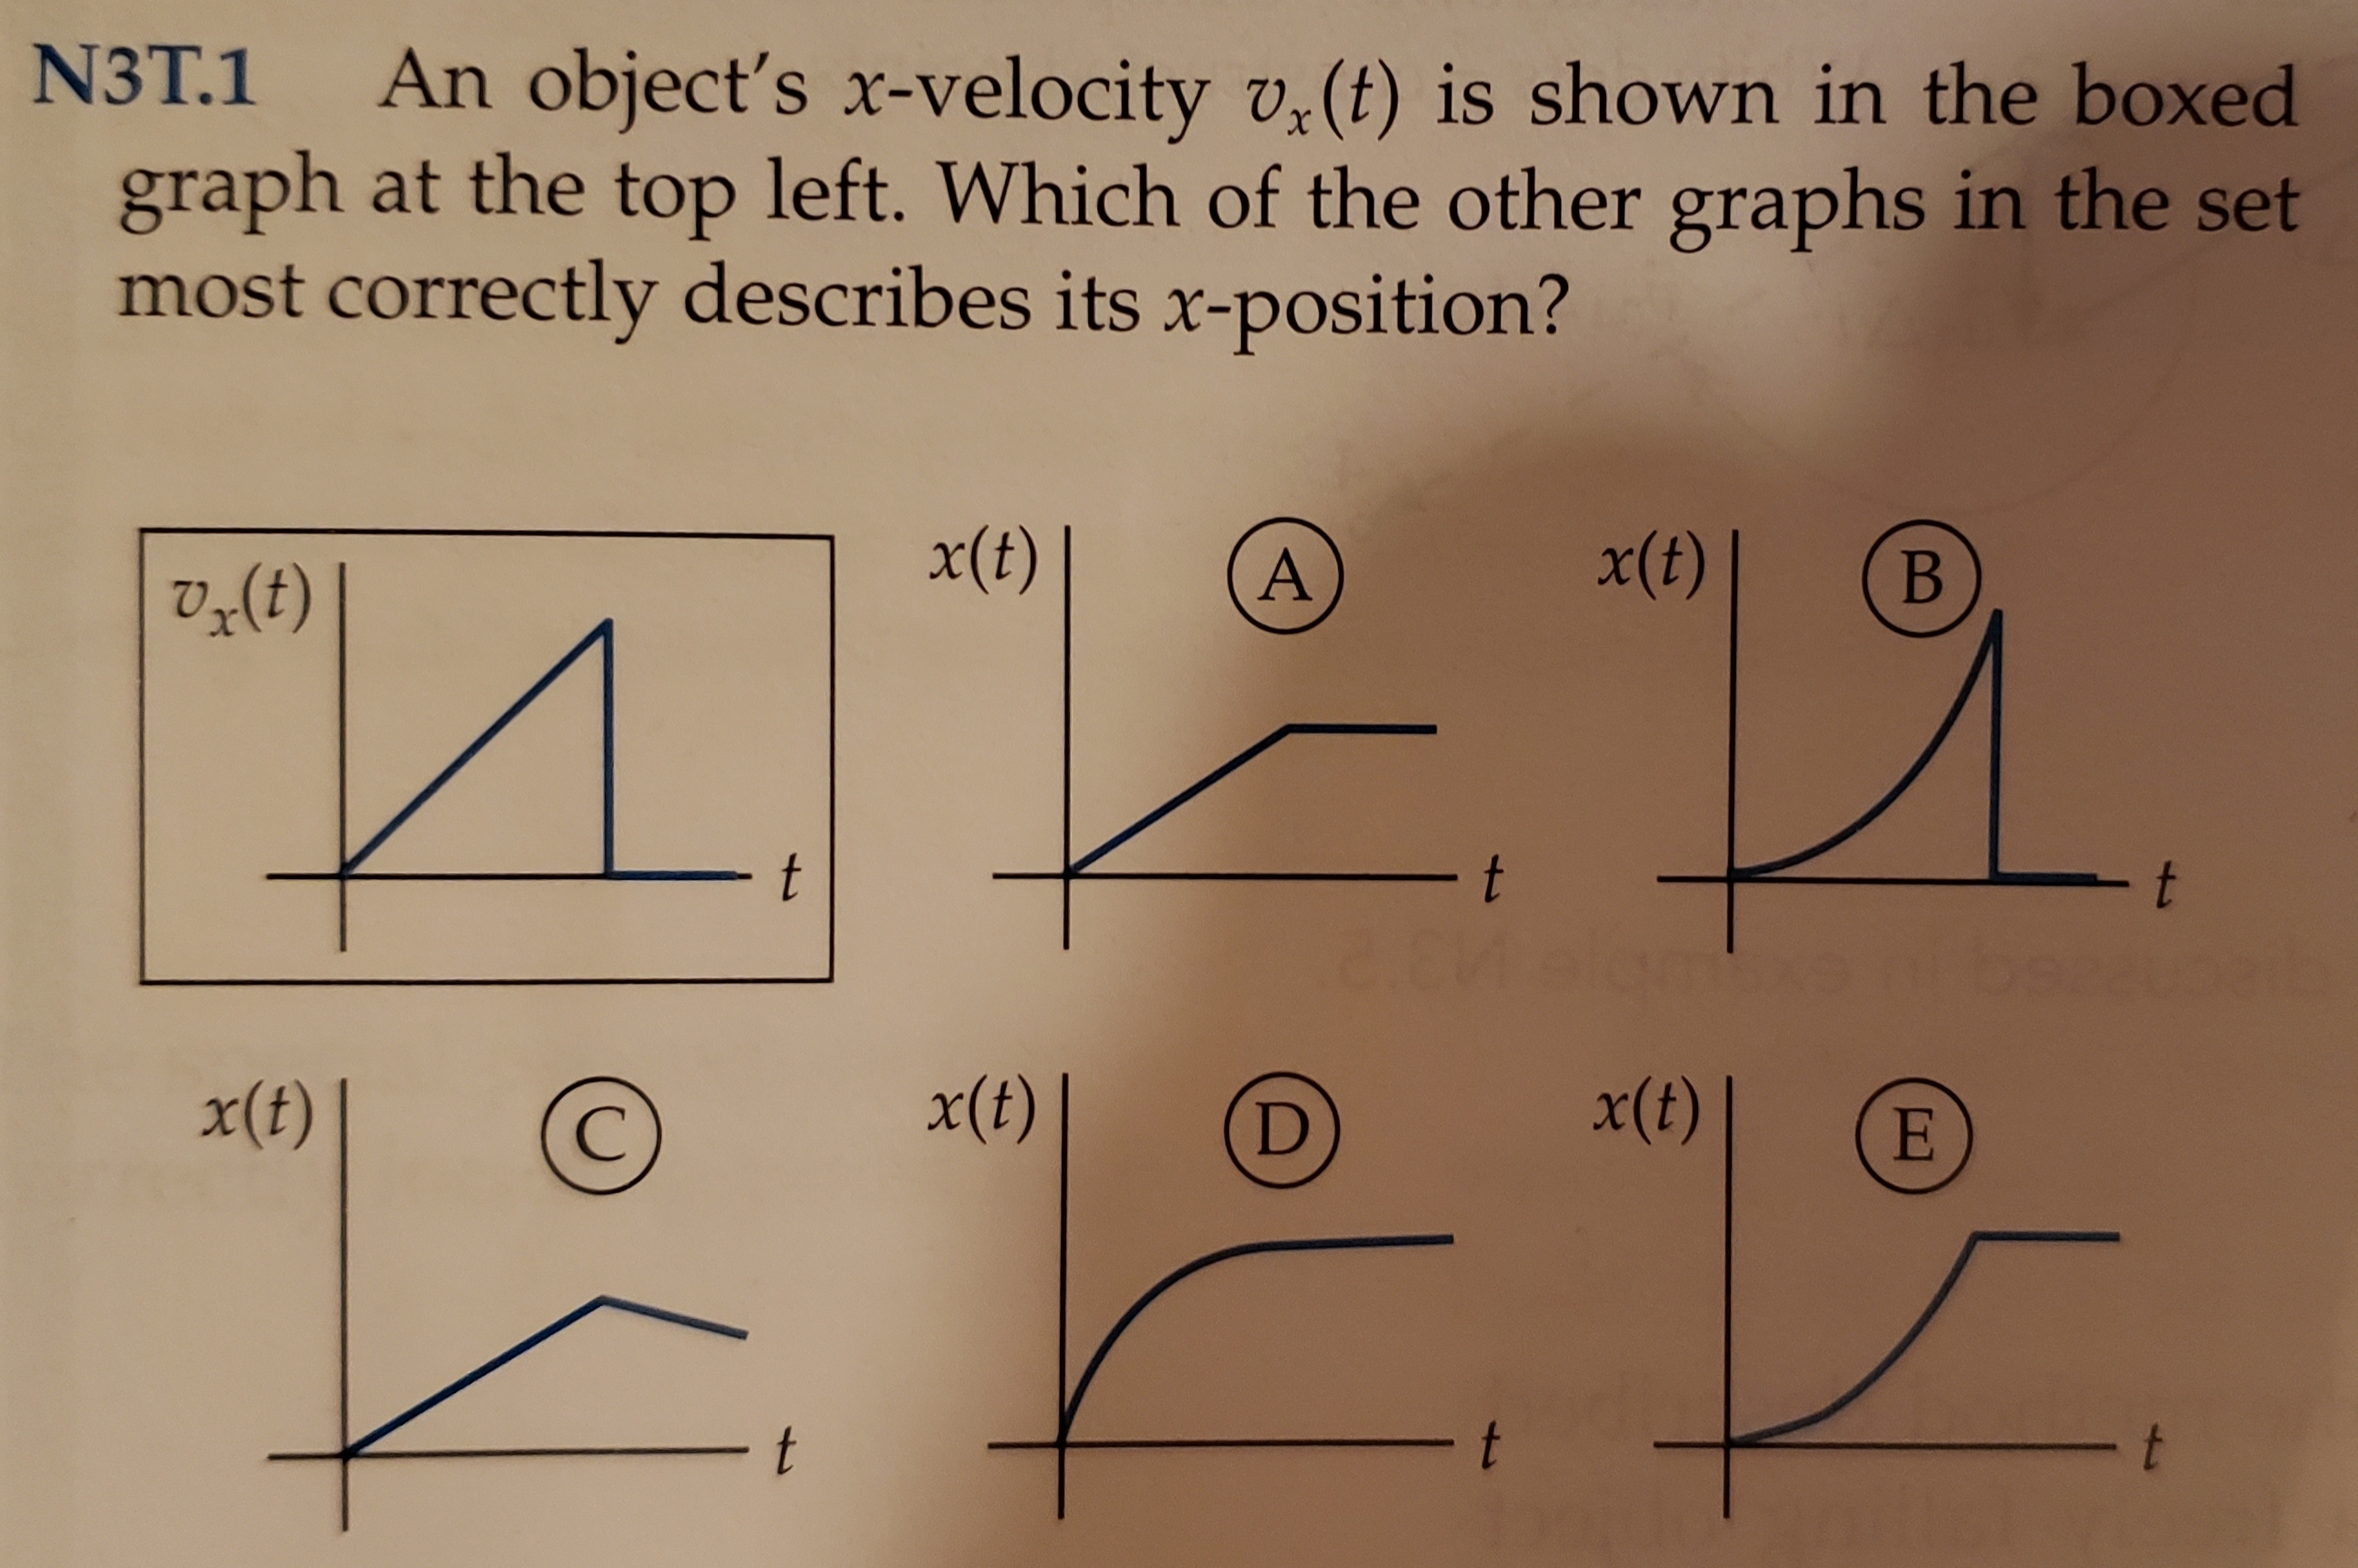 N3T.1
An object's x-velocity v,(t) is shown in the boxed
graph at the top left. Which of the other graphs in the set
most correctly describes its x-position?
x(t)
x(t)
В
И.
12
t
t
t
x(t)
x(t)
x(t)
E
t
